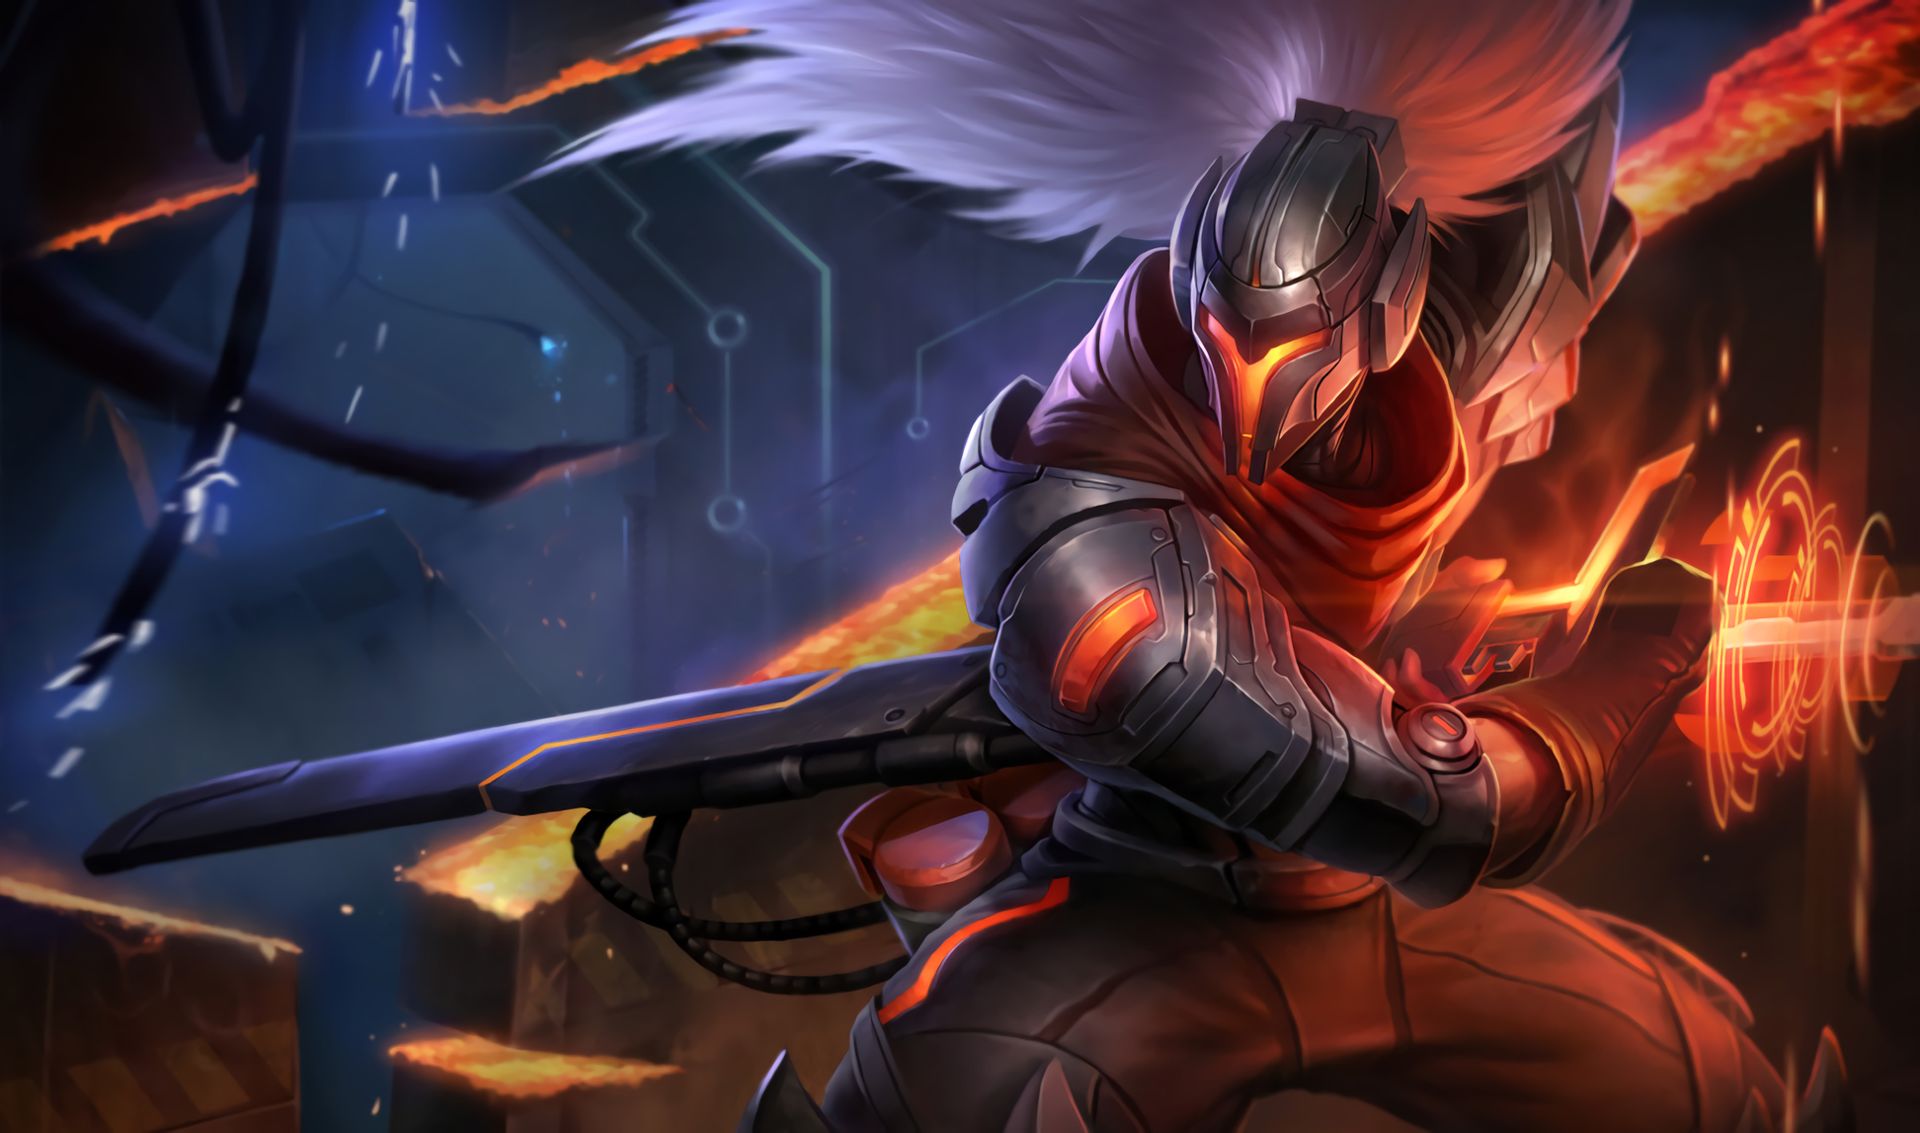 video game, league of legends, sword, yasuo (league of legends) wallpaper for mobile